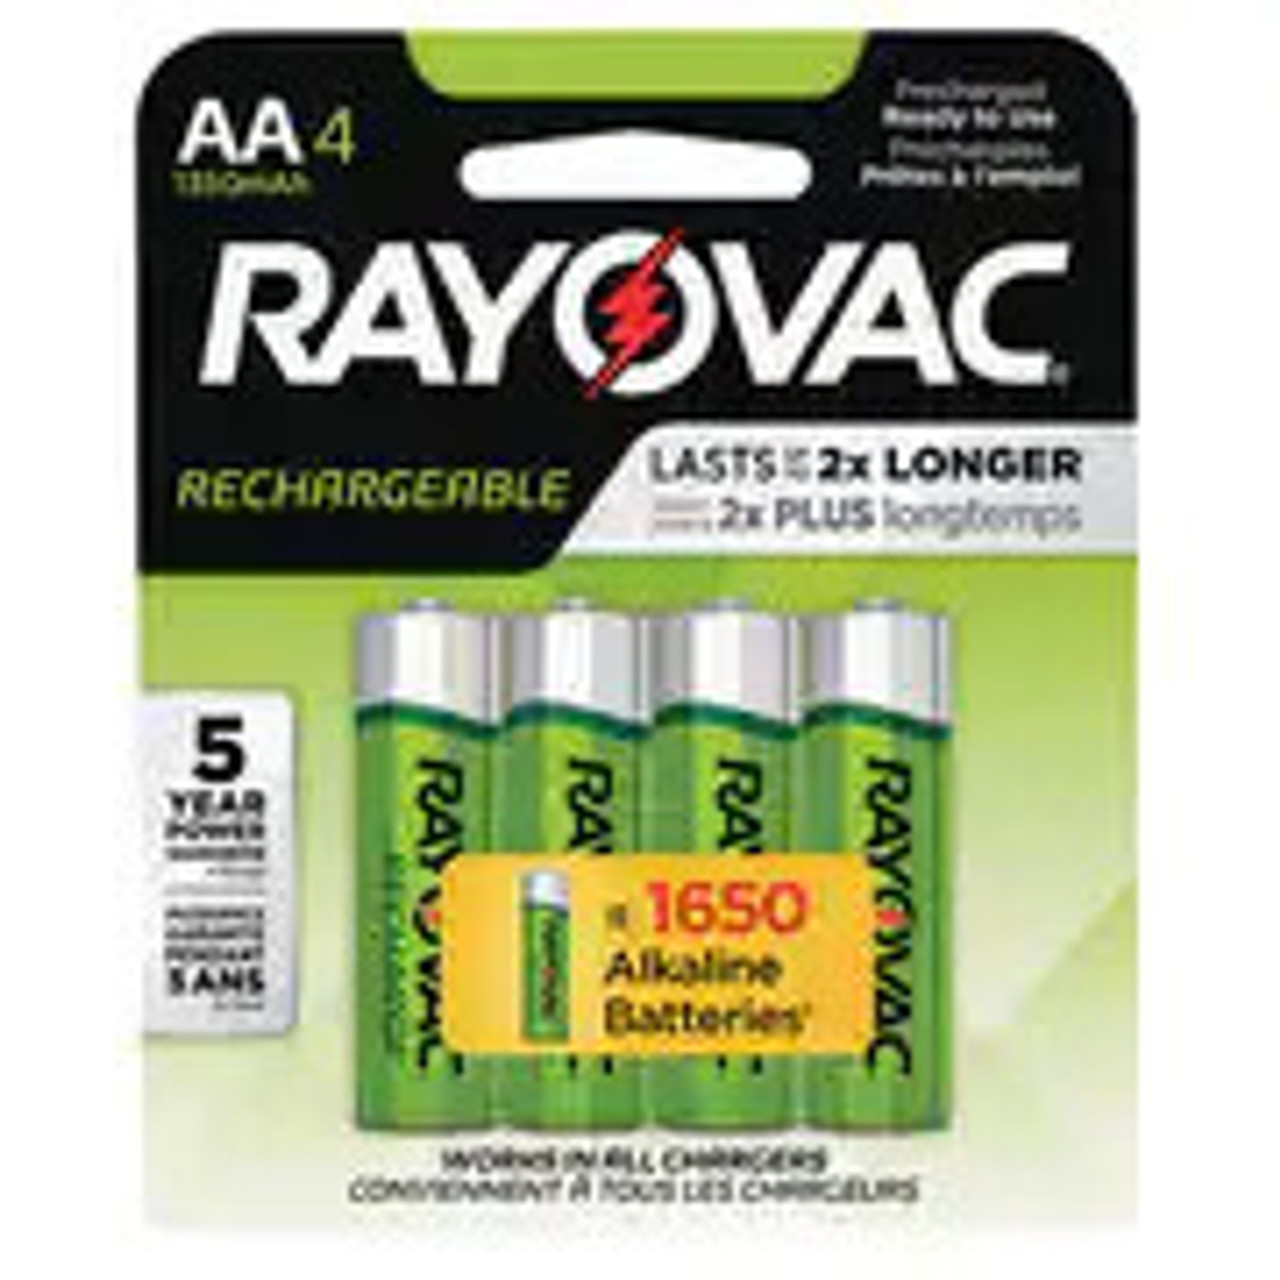 Annoteren Overdreven smog Rayovac Precharged Rechargeable AA Batteries 1350mAh - 4 Pack + FREE  SHIPPING! - Brooklyn Battery Works